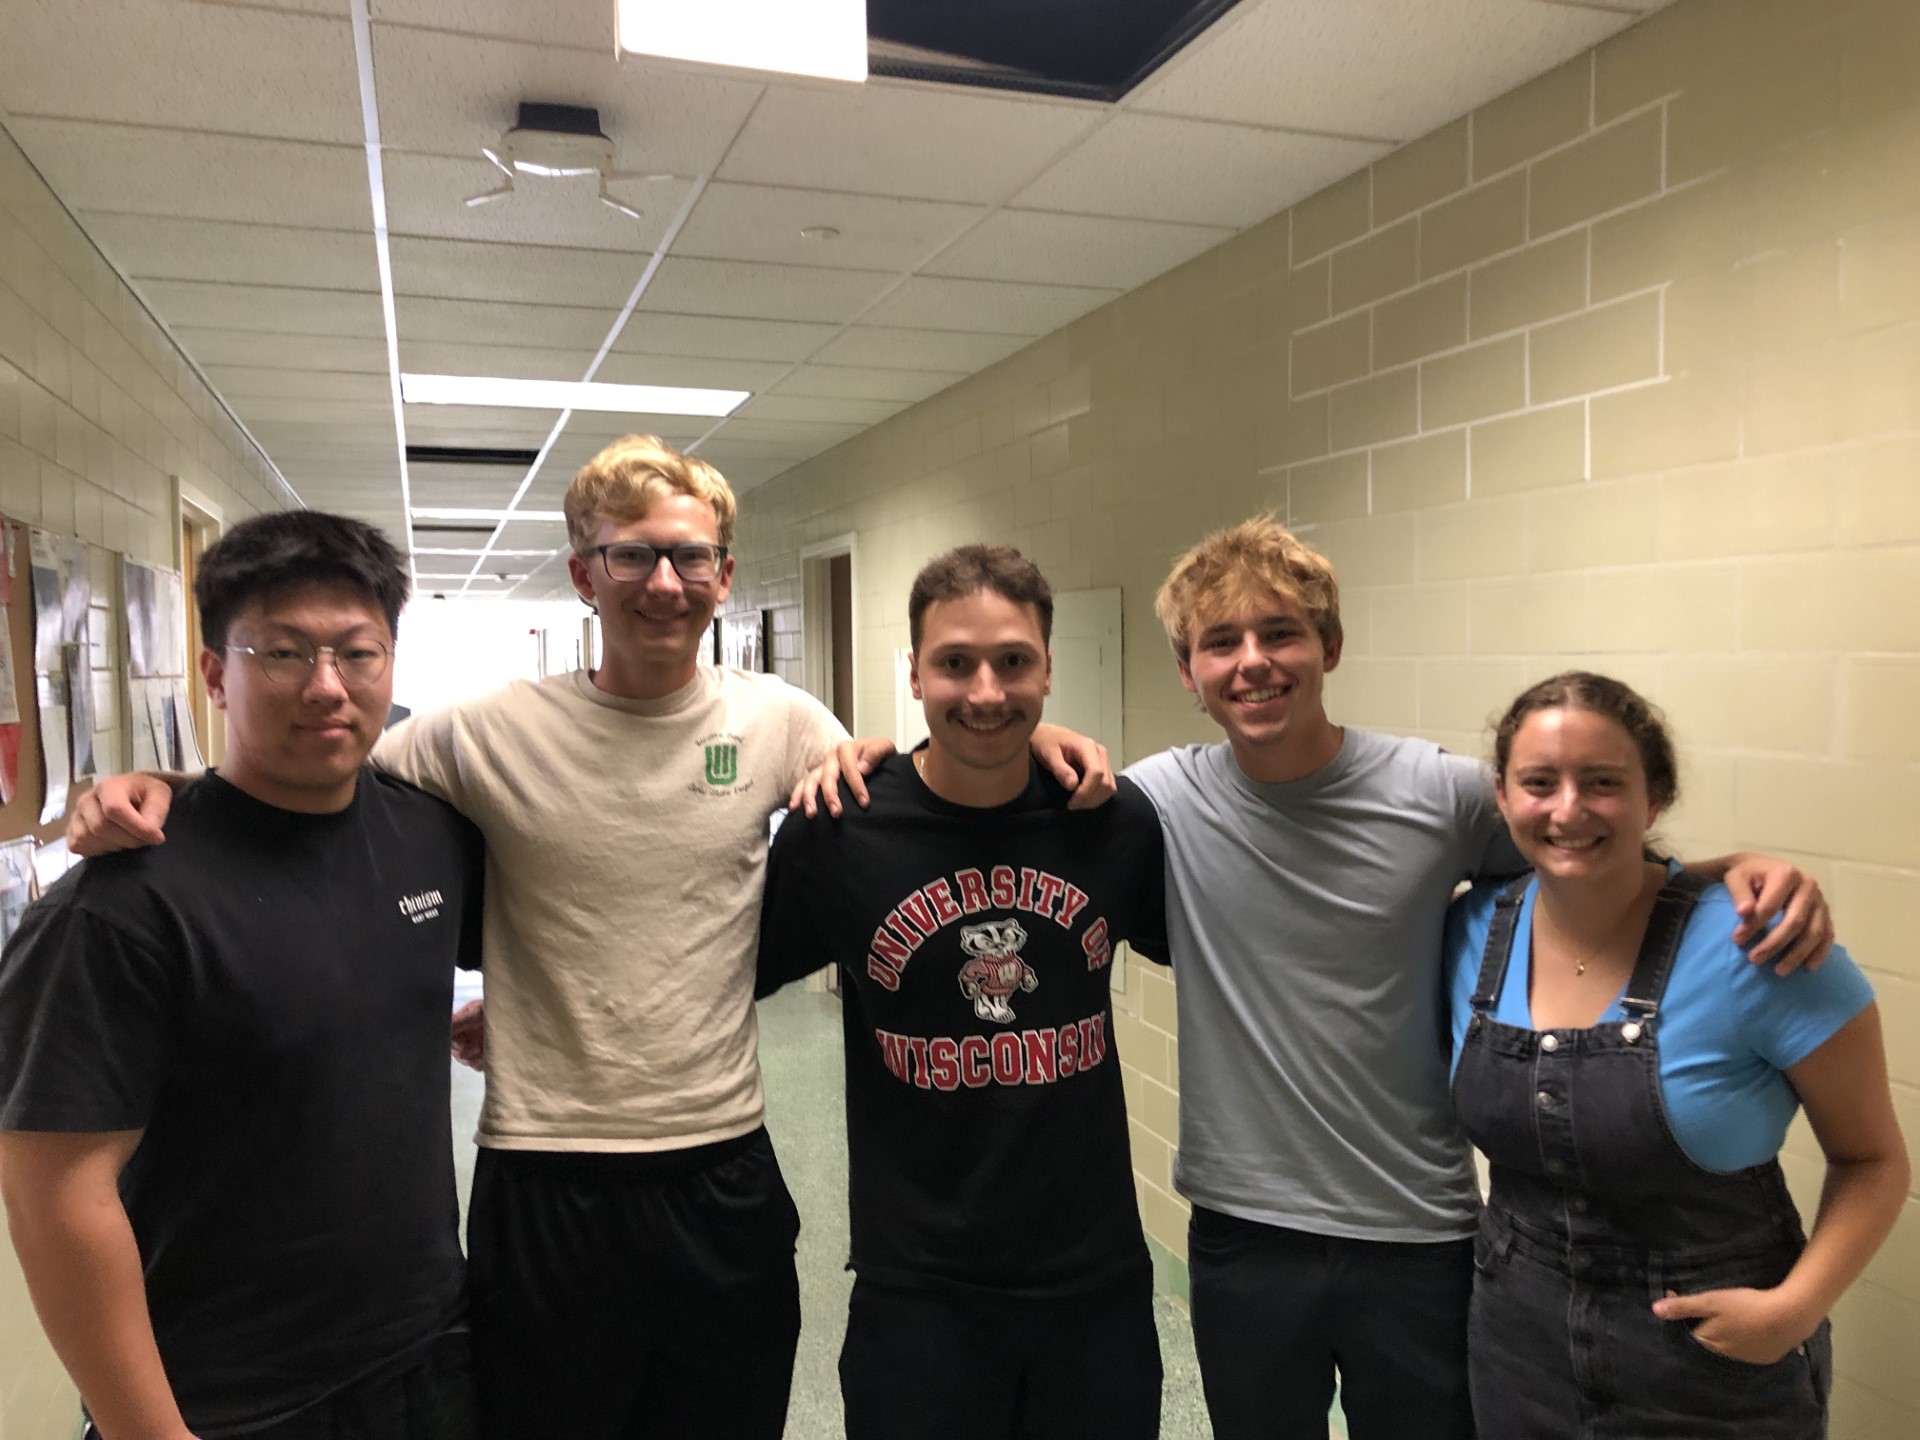 Team Members depicted in team photo; Far left: Zhaoyun/Jerry Tang, Middle Left: Nick Symons, Middle: Sawyer Bussey, Middle right: Tyler Haupert, Far right: Julia Salita